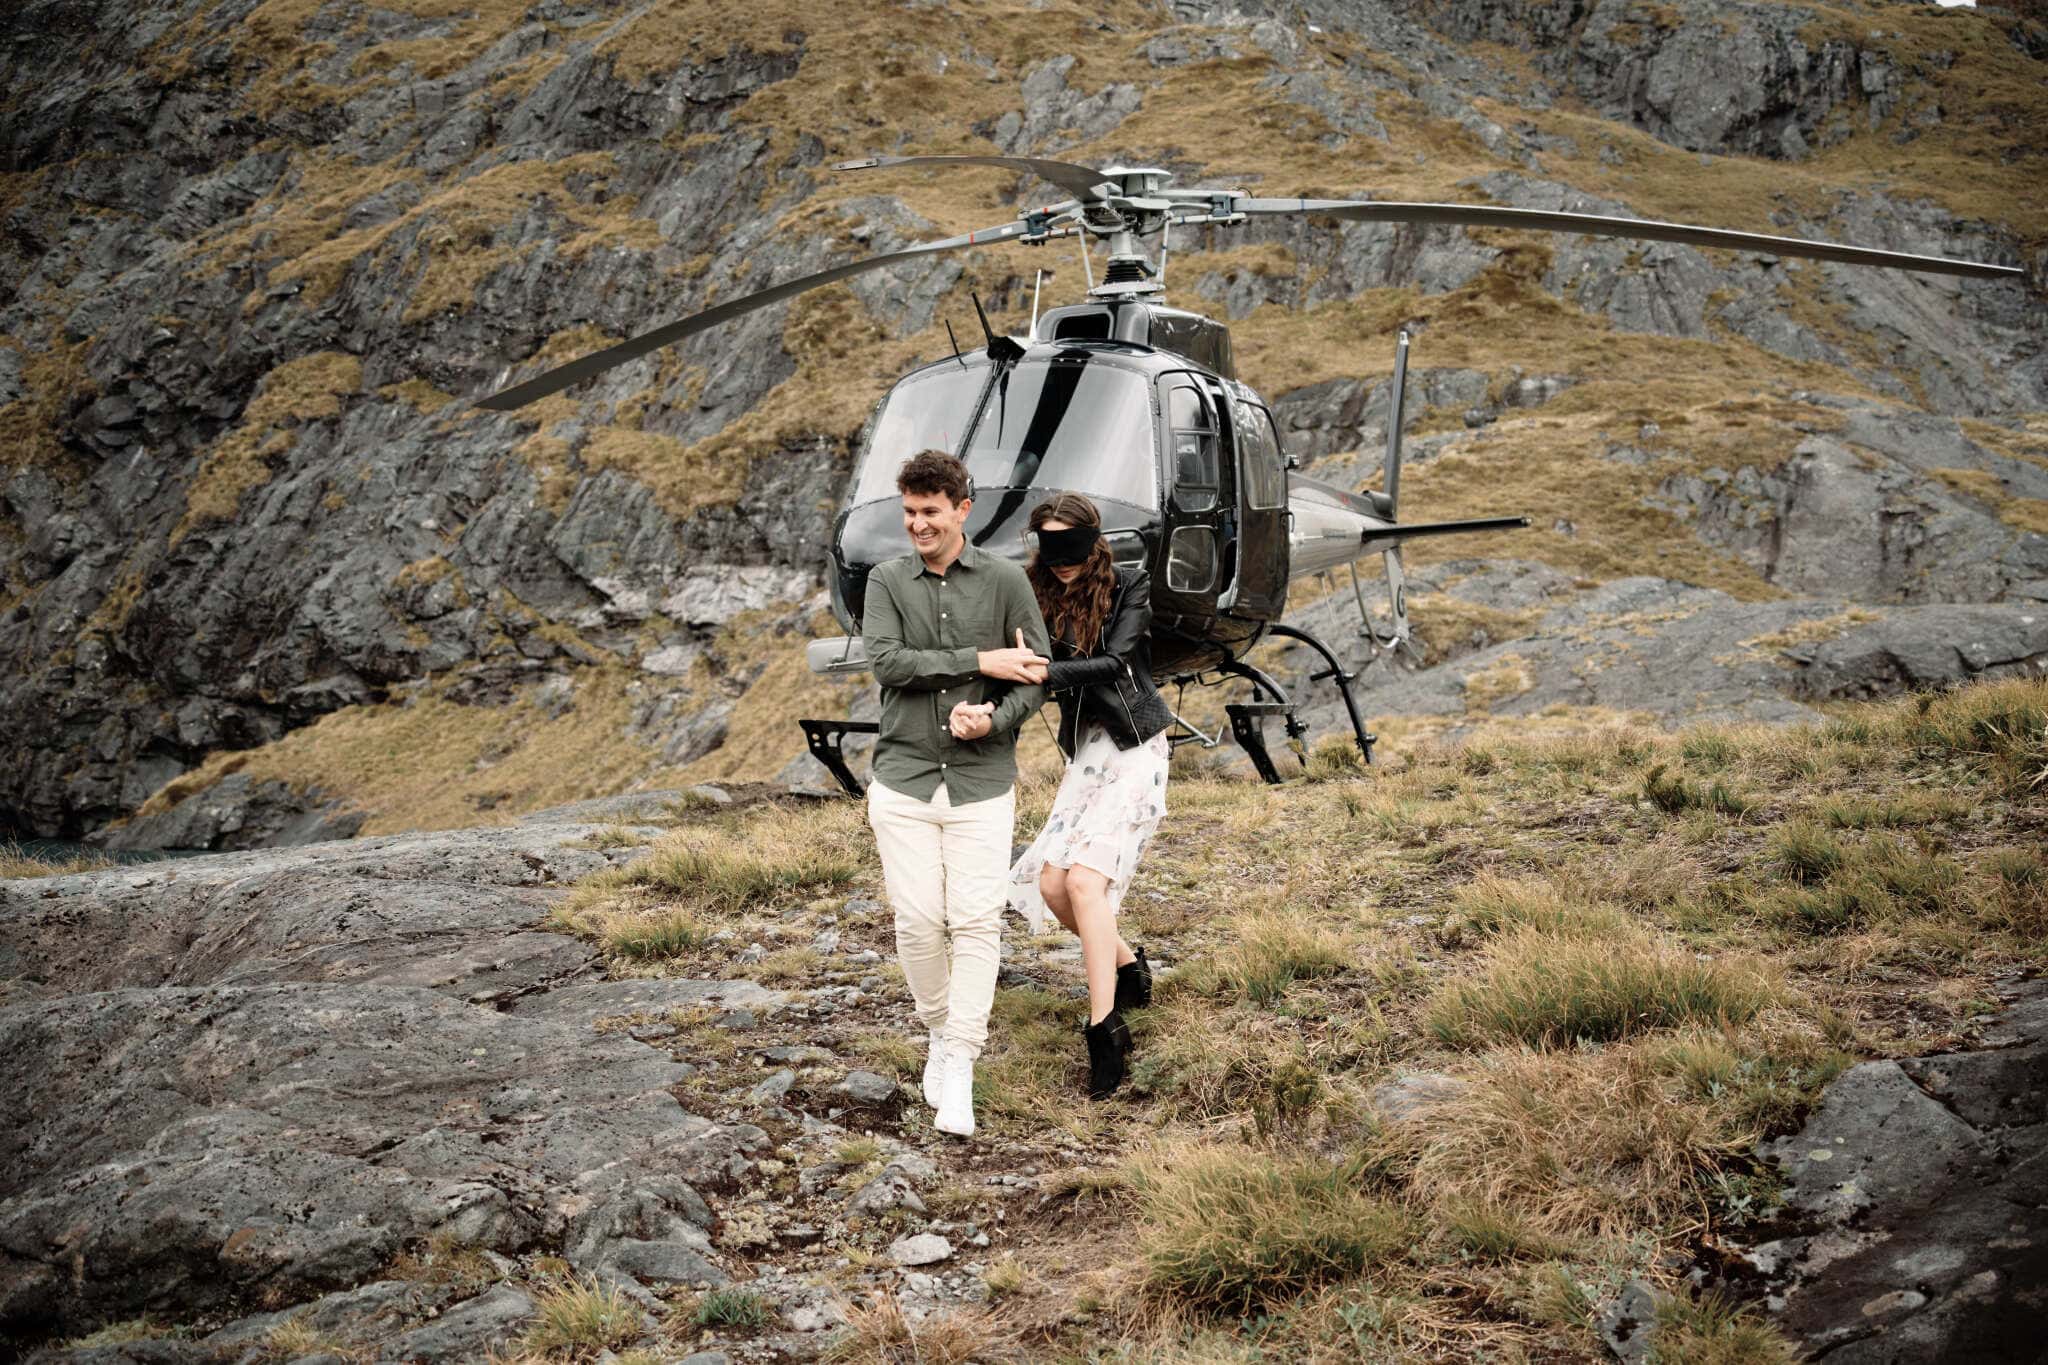 Scott and Hayley walking next to a helicopter in the mountains.